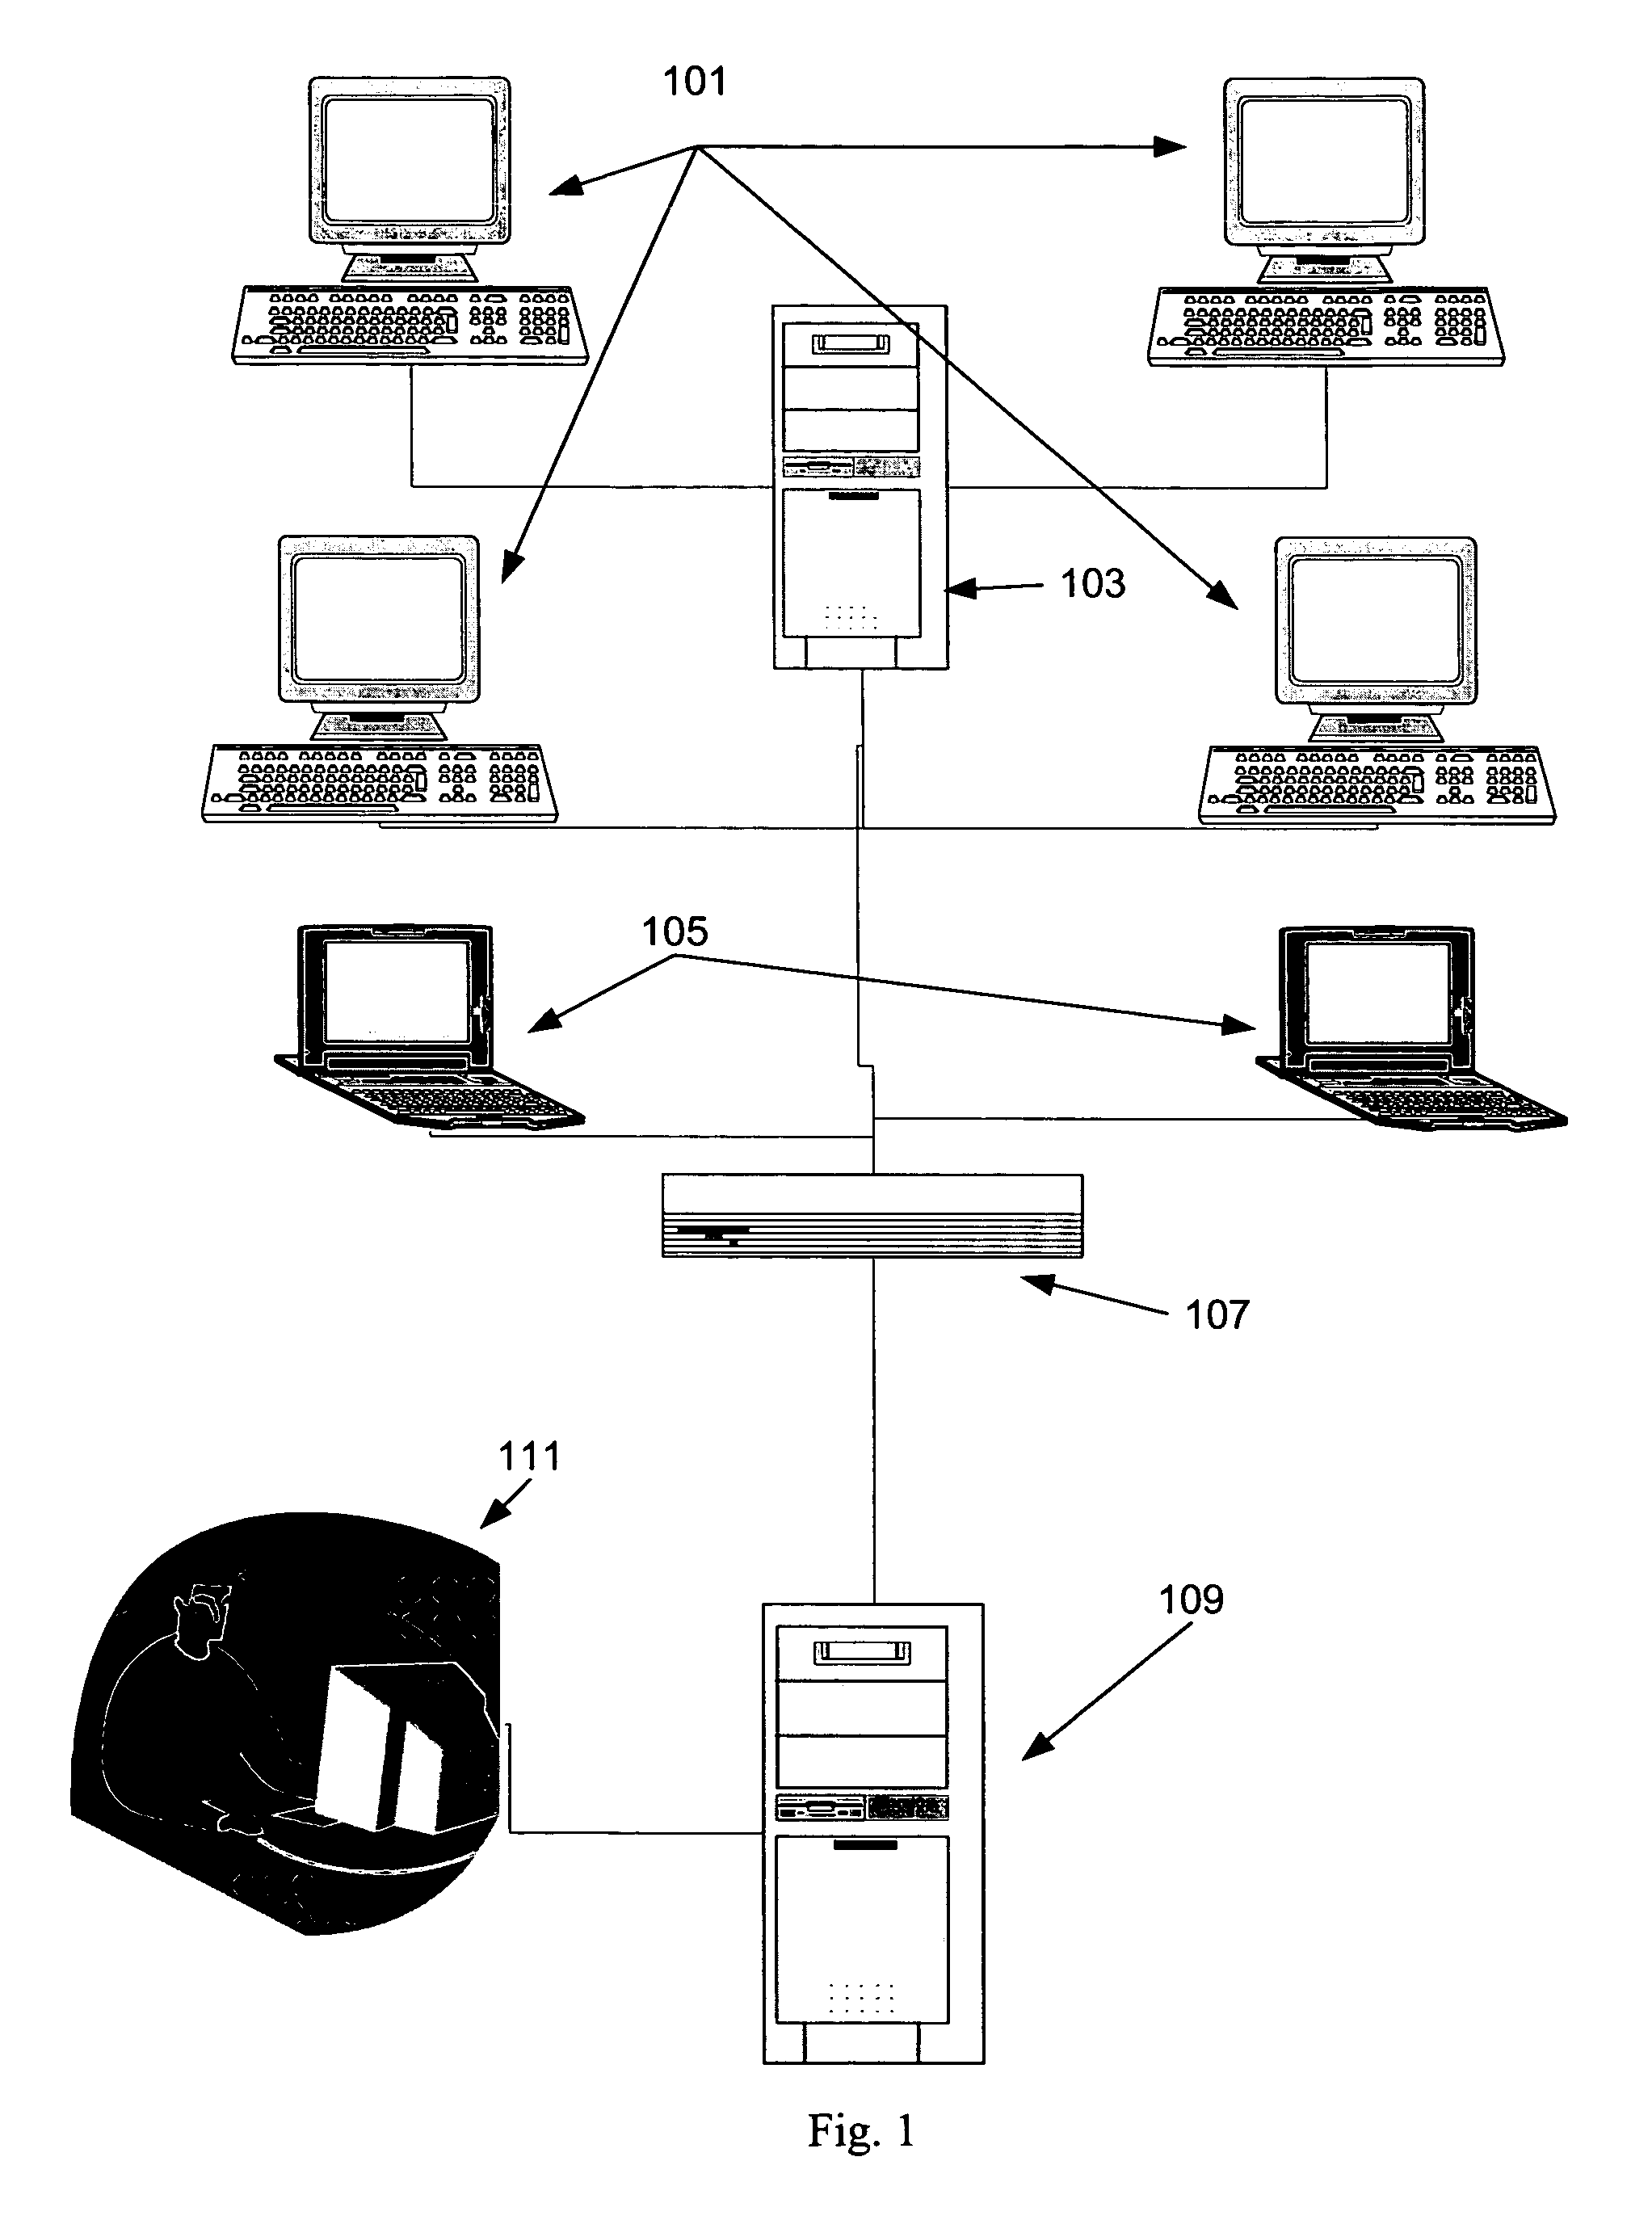 Process and system for updating semantic knowledge over a computer network